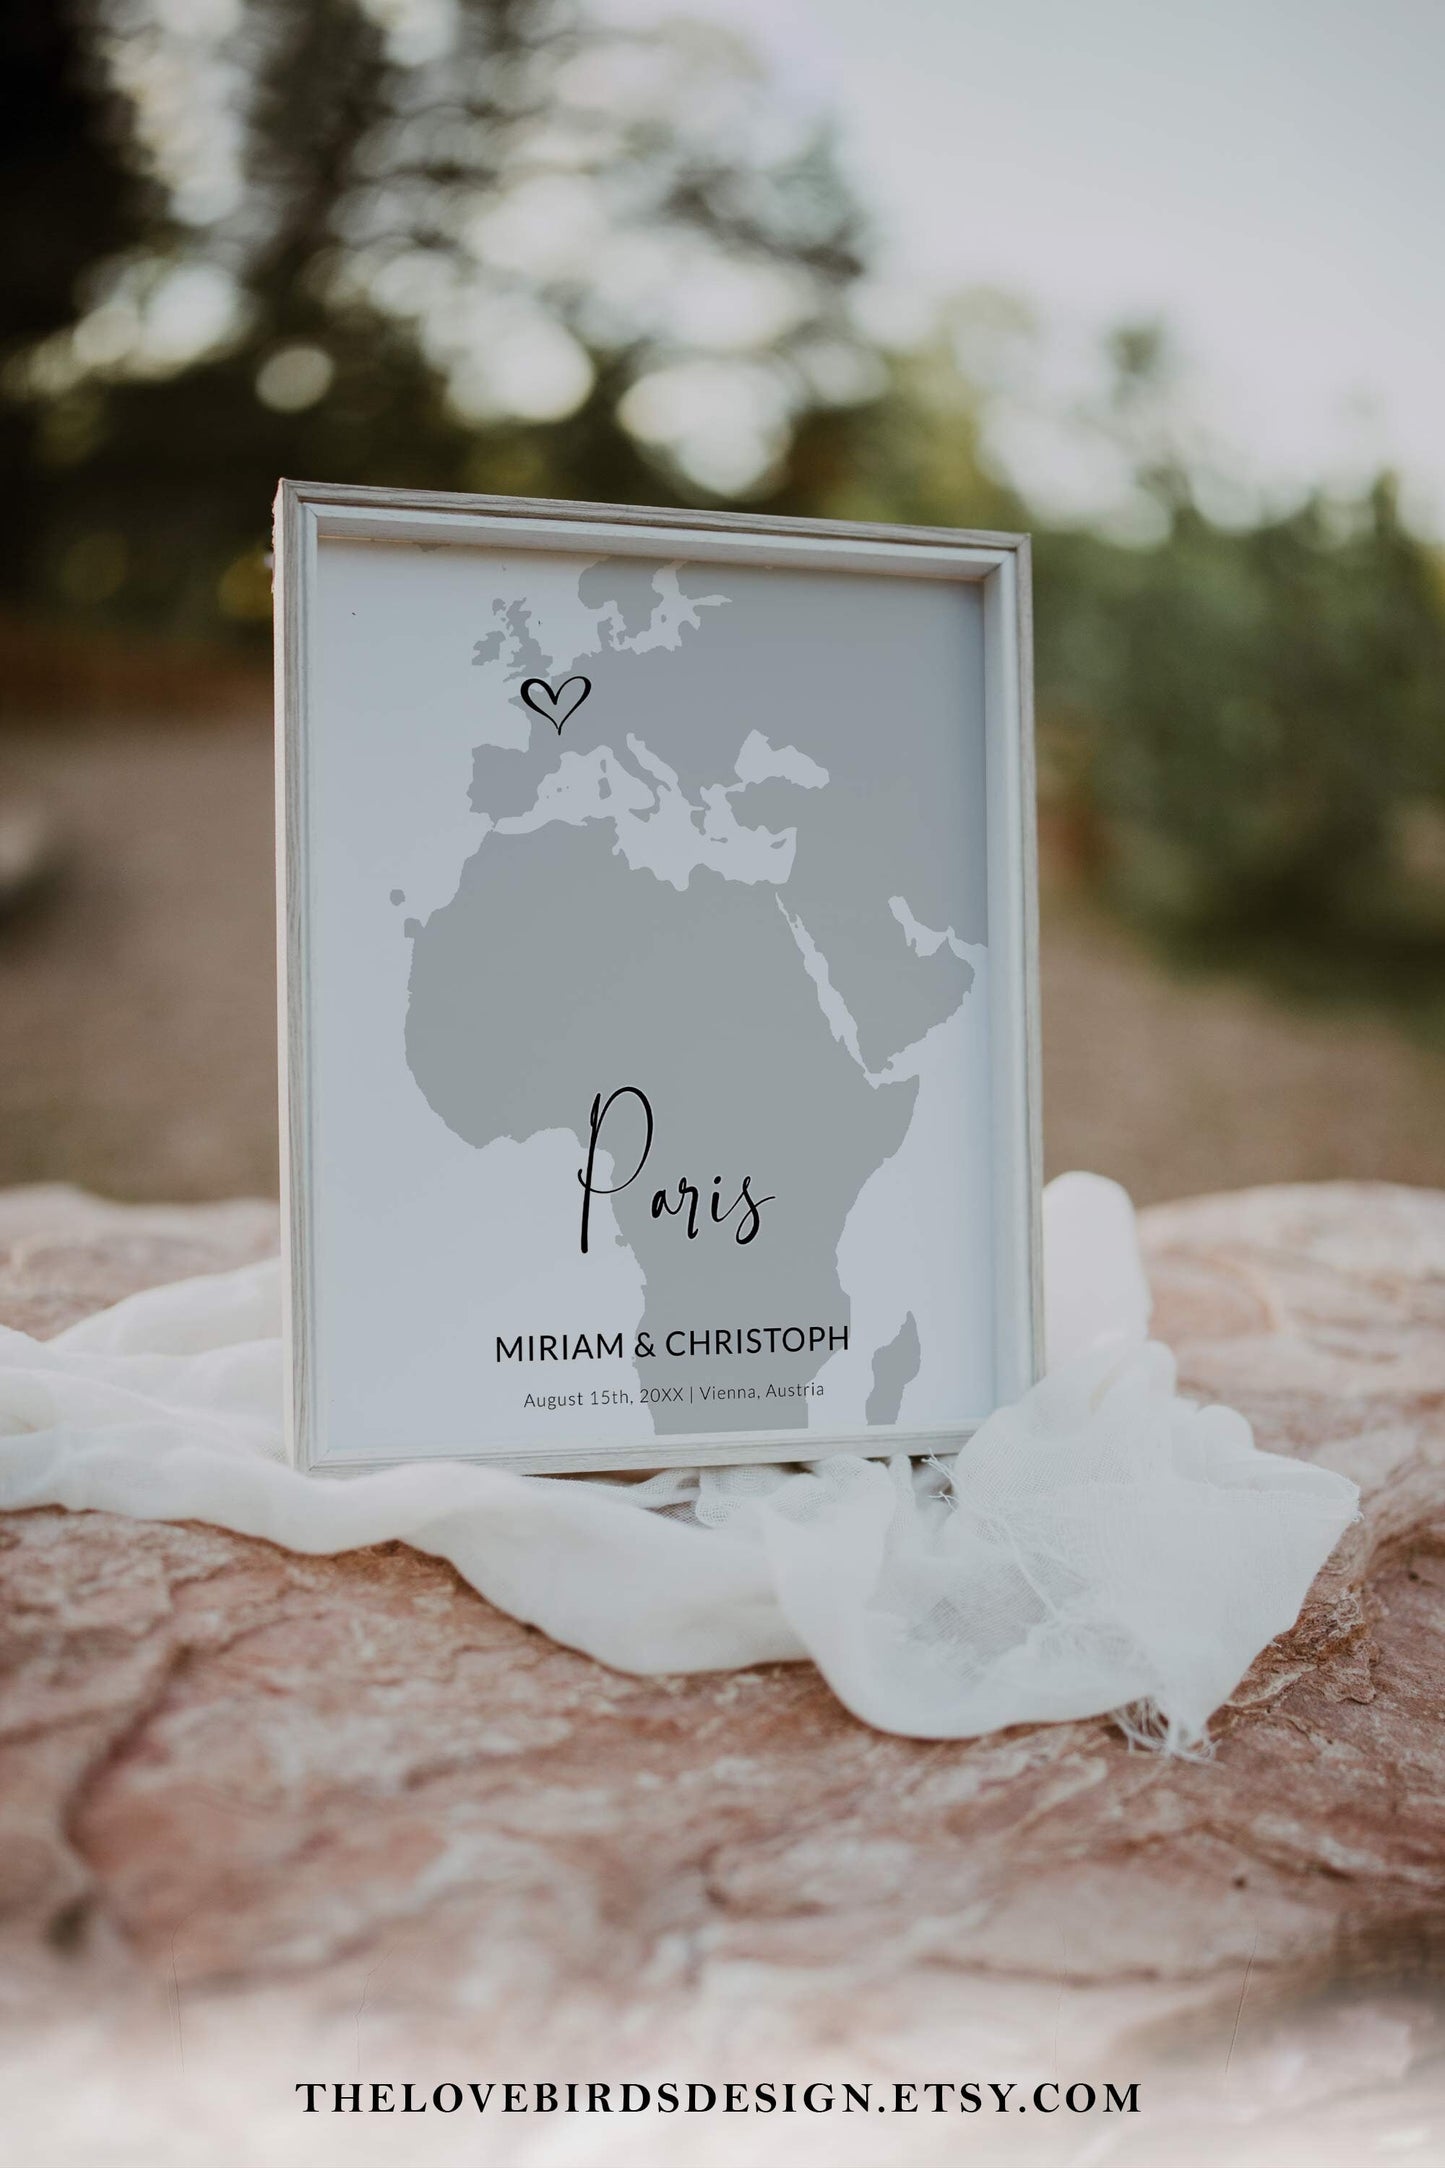 Travel Wedding Table Numbers for Destination Wedding, Passport Wedding Decorations with World Map #072w